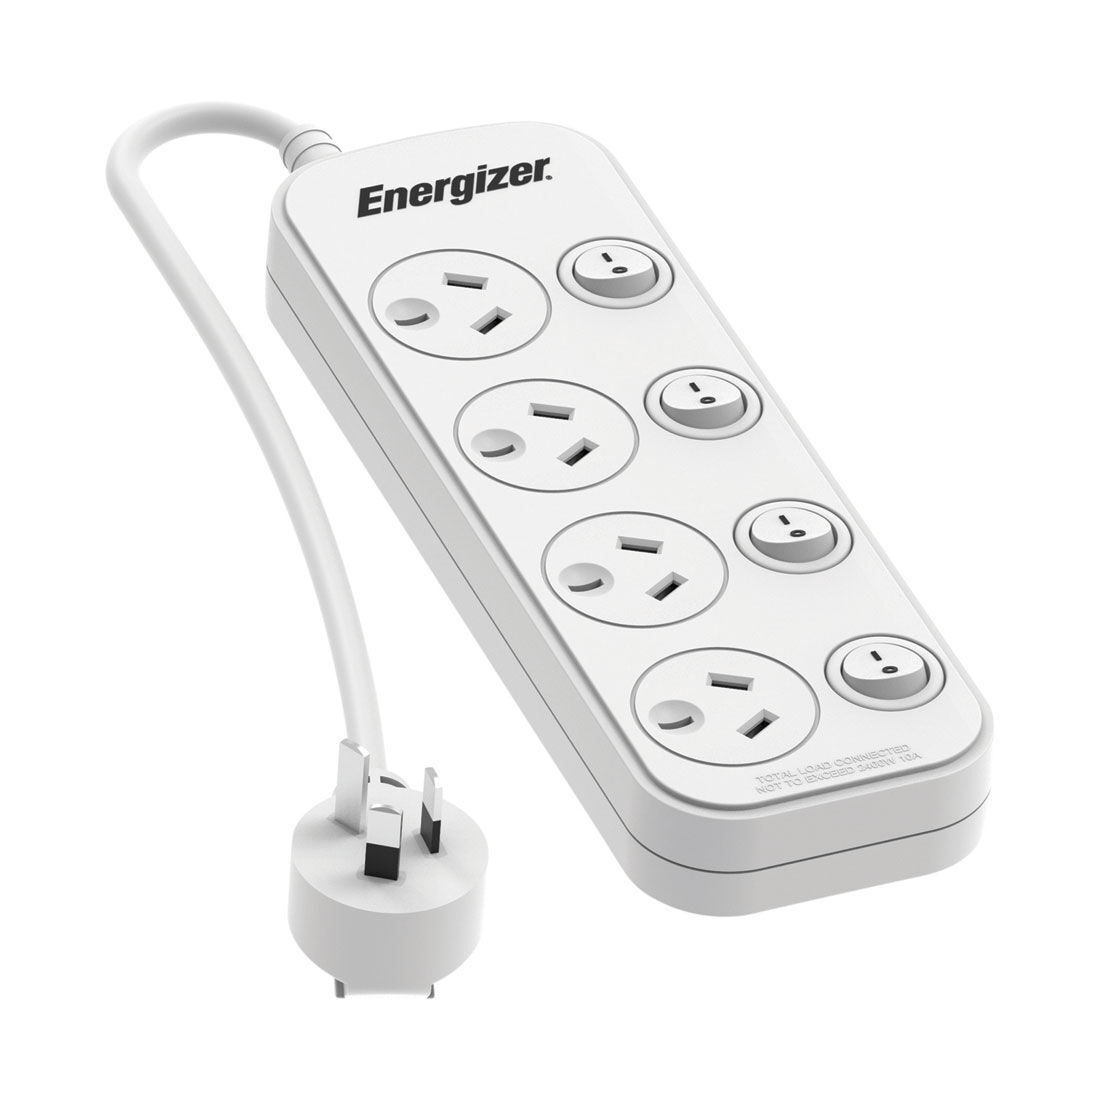 Energizer 4 Outletpowerboard W/Switches, , scaau_hi-res